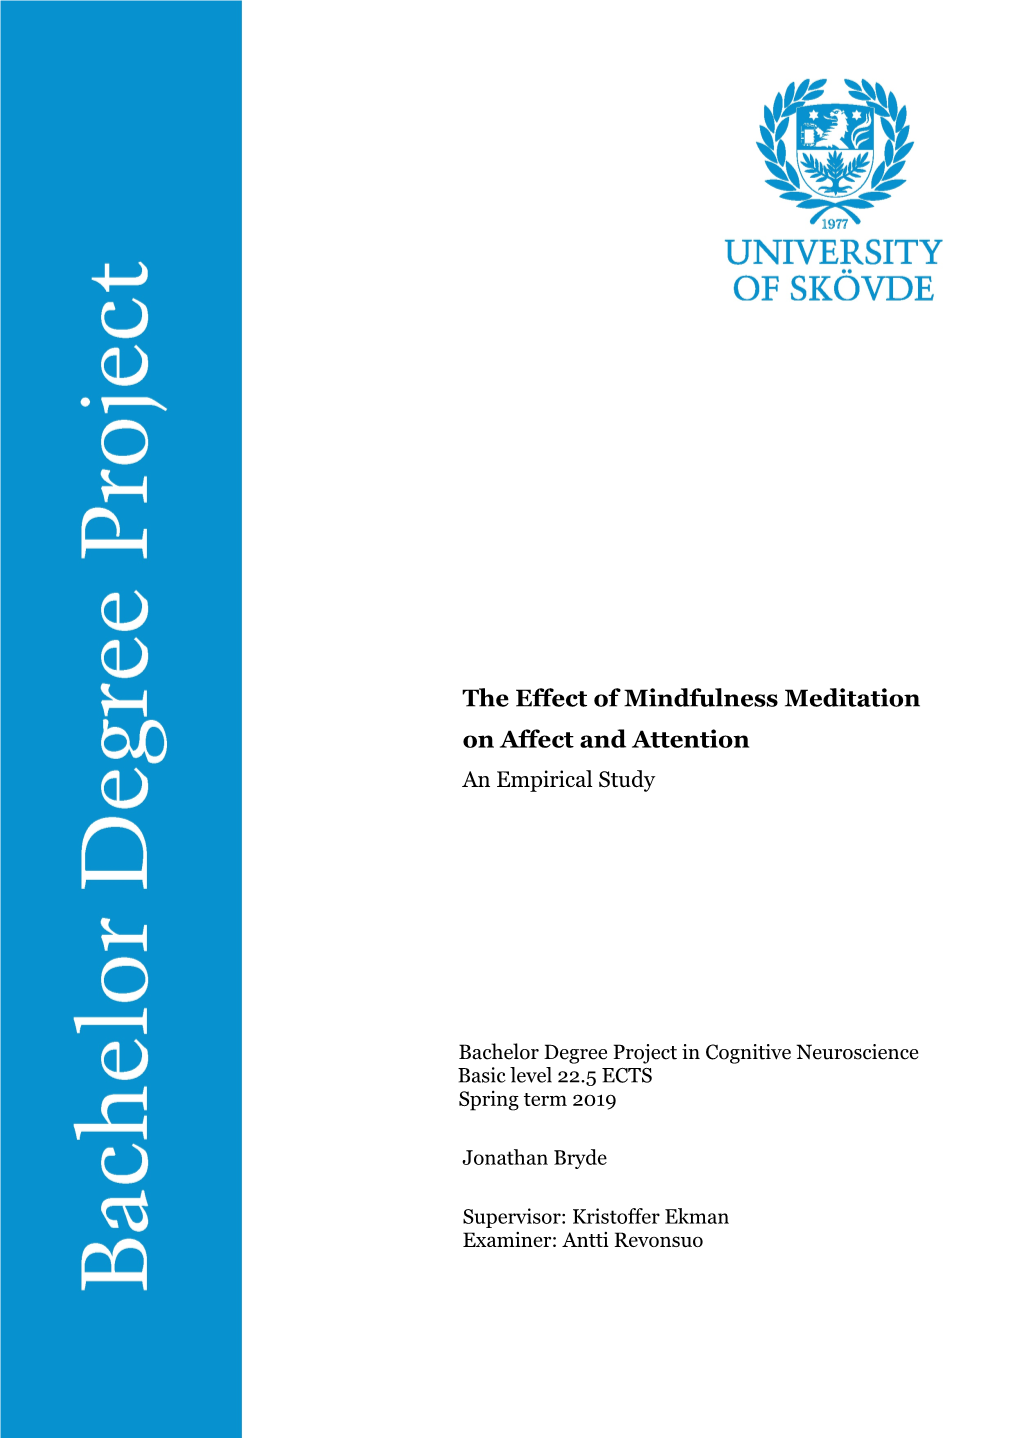 The Effect of Mindfulness Meditation on Affect and Attention an Empirical Study